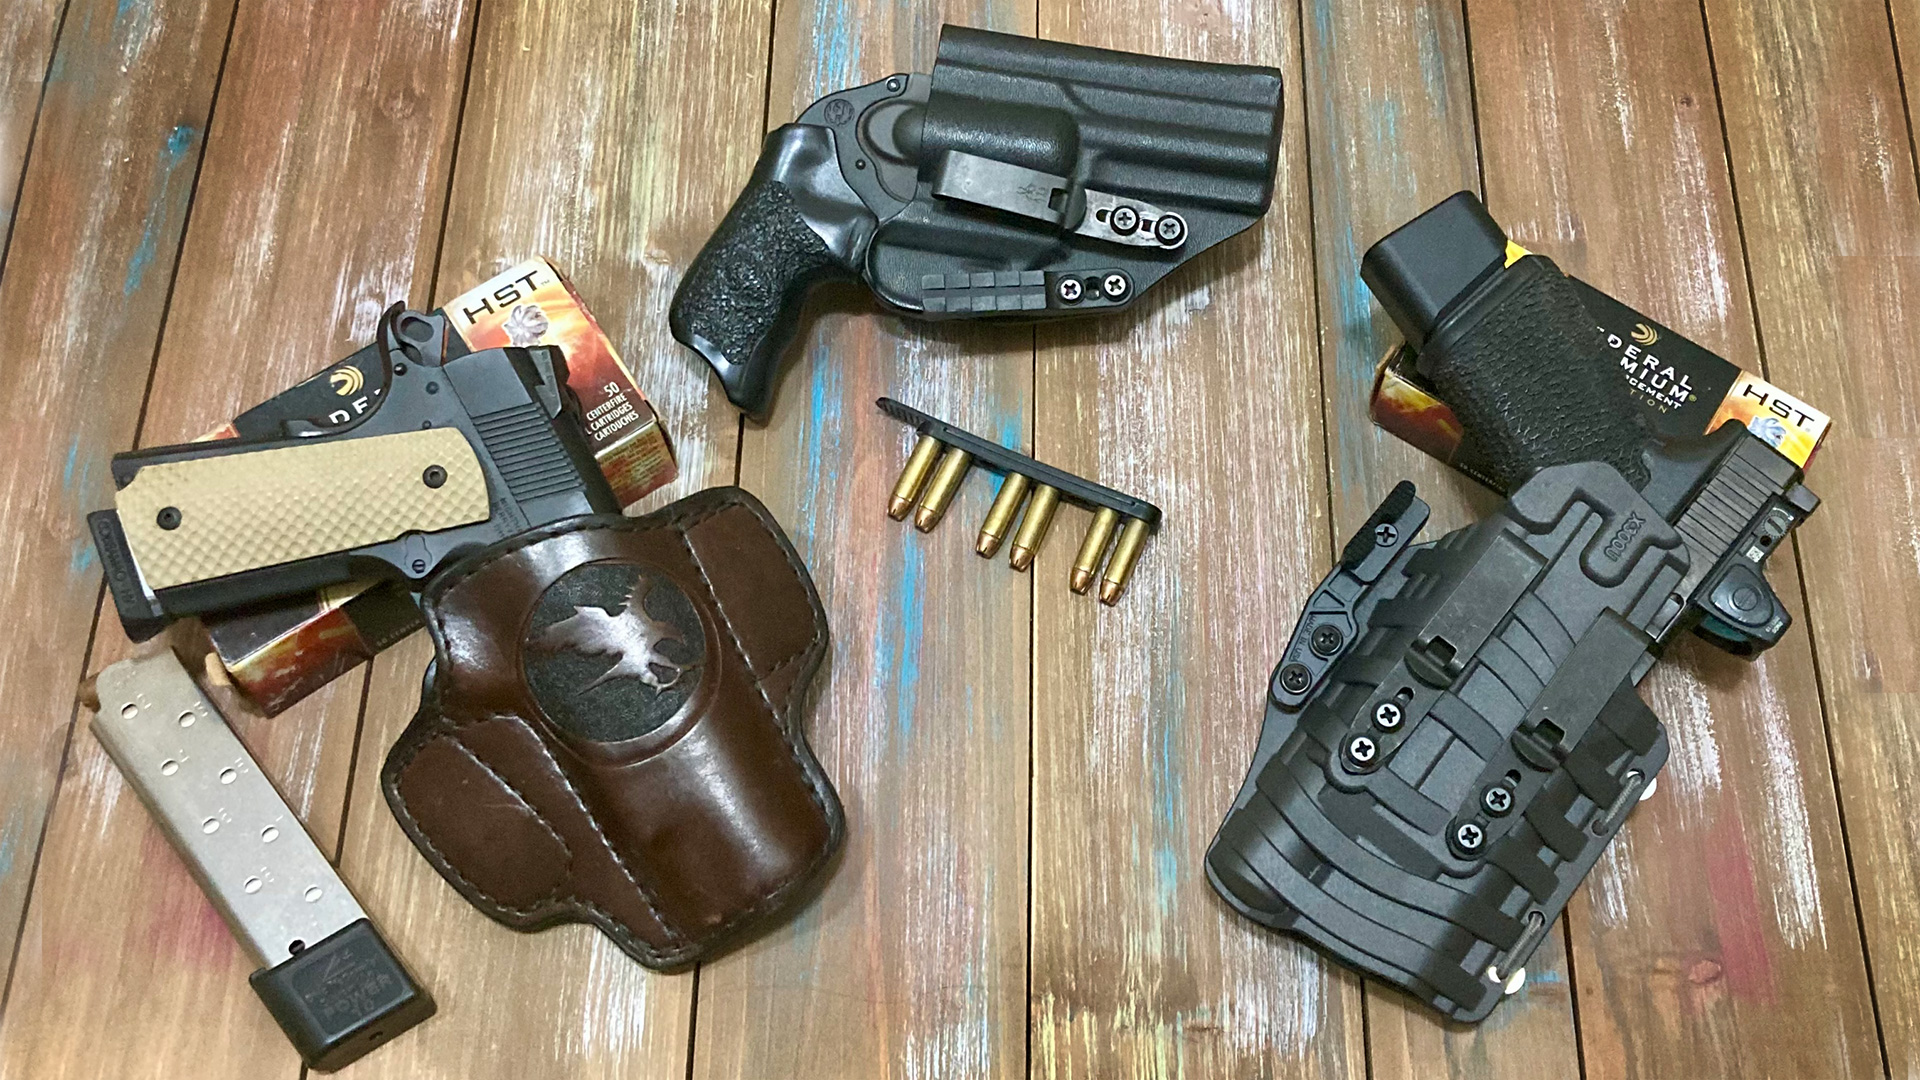 Gun Holsters  American Made Concealed Carry & Open Carry Kydex